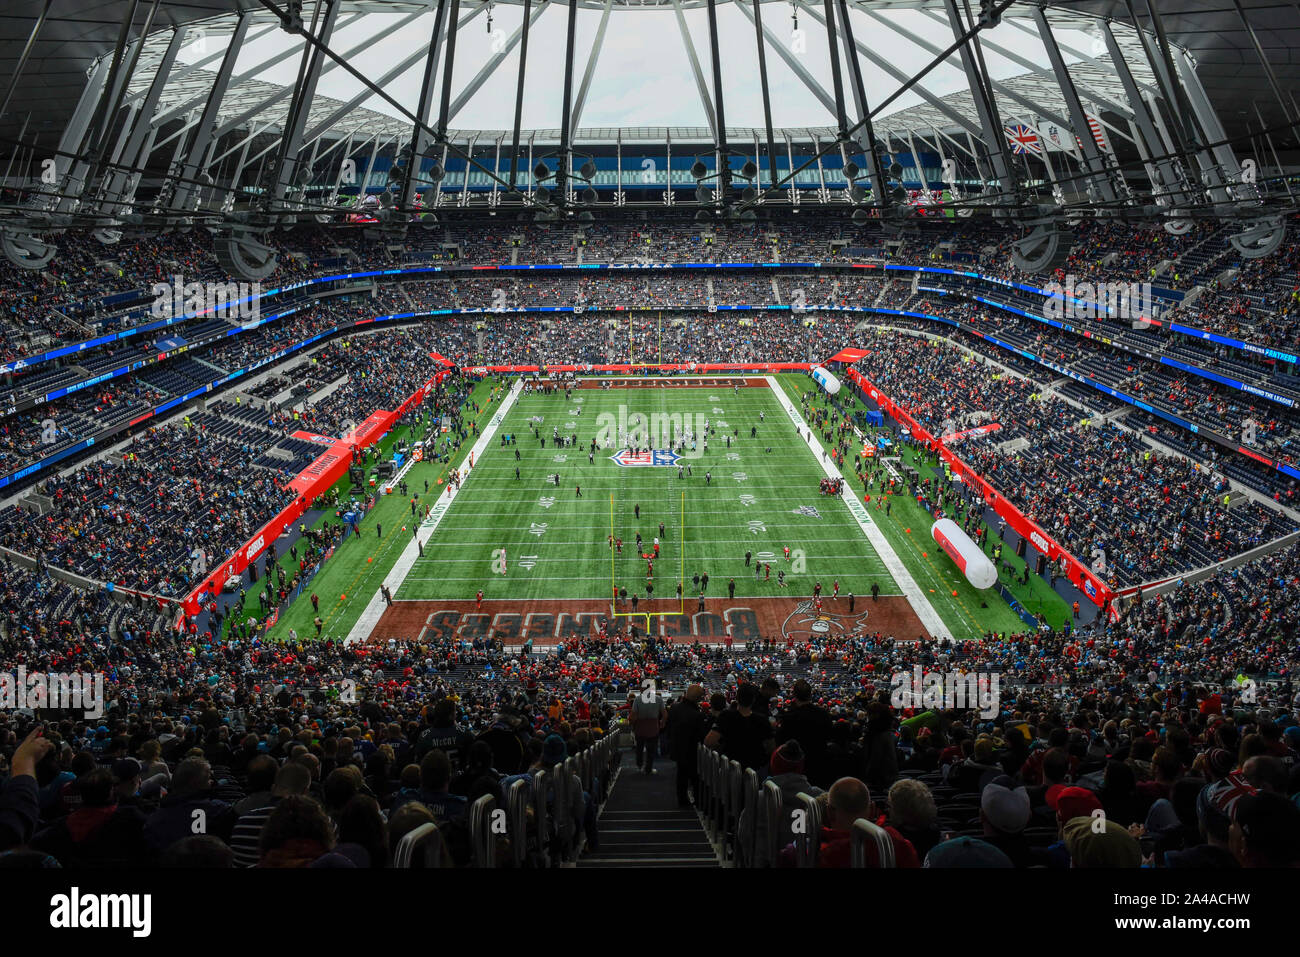 London, UK.  13 October 2019. General view of the stadium ahead of the NFL match Tampa Bay Buccaneers v Carolina Panthers at Tottenham Hotspur Stadium.  Credit: Stephen Chung / Alamy Live News Stock Photo